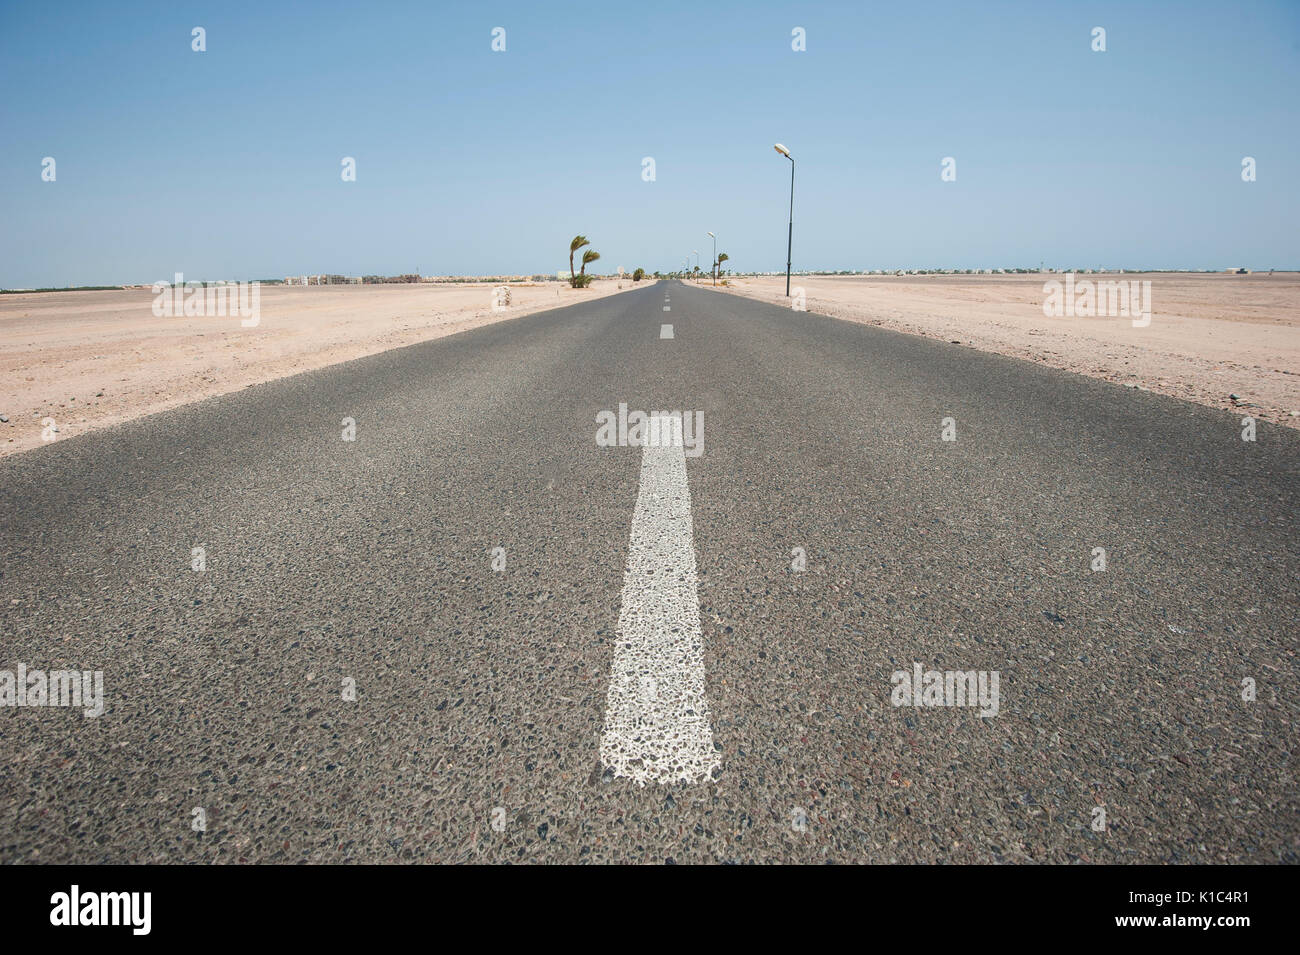 Long straight desert road in remote arid landscape going to infinity vanishing point Stock Photo